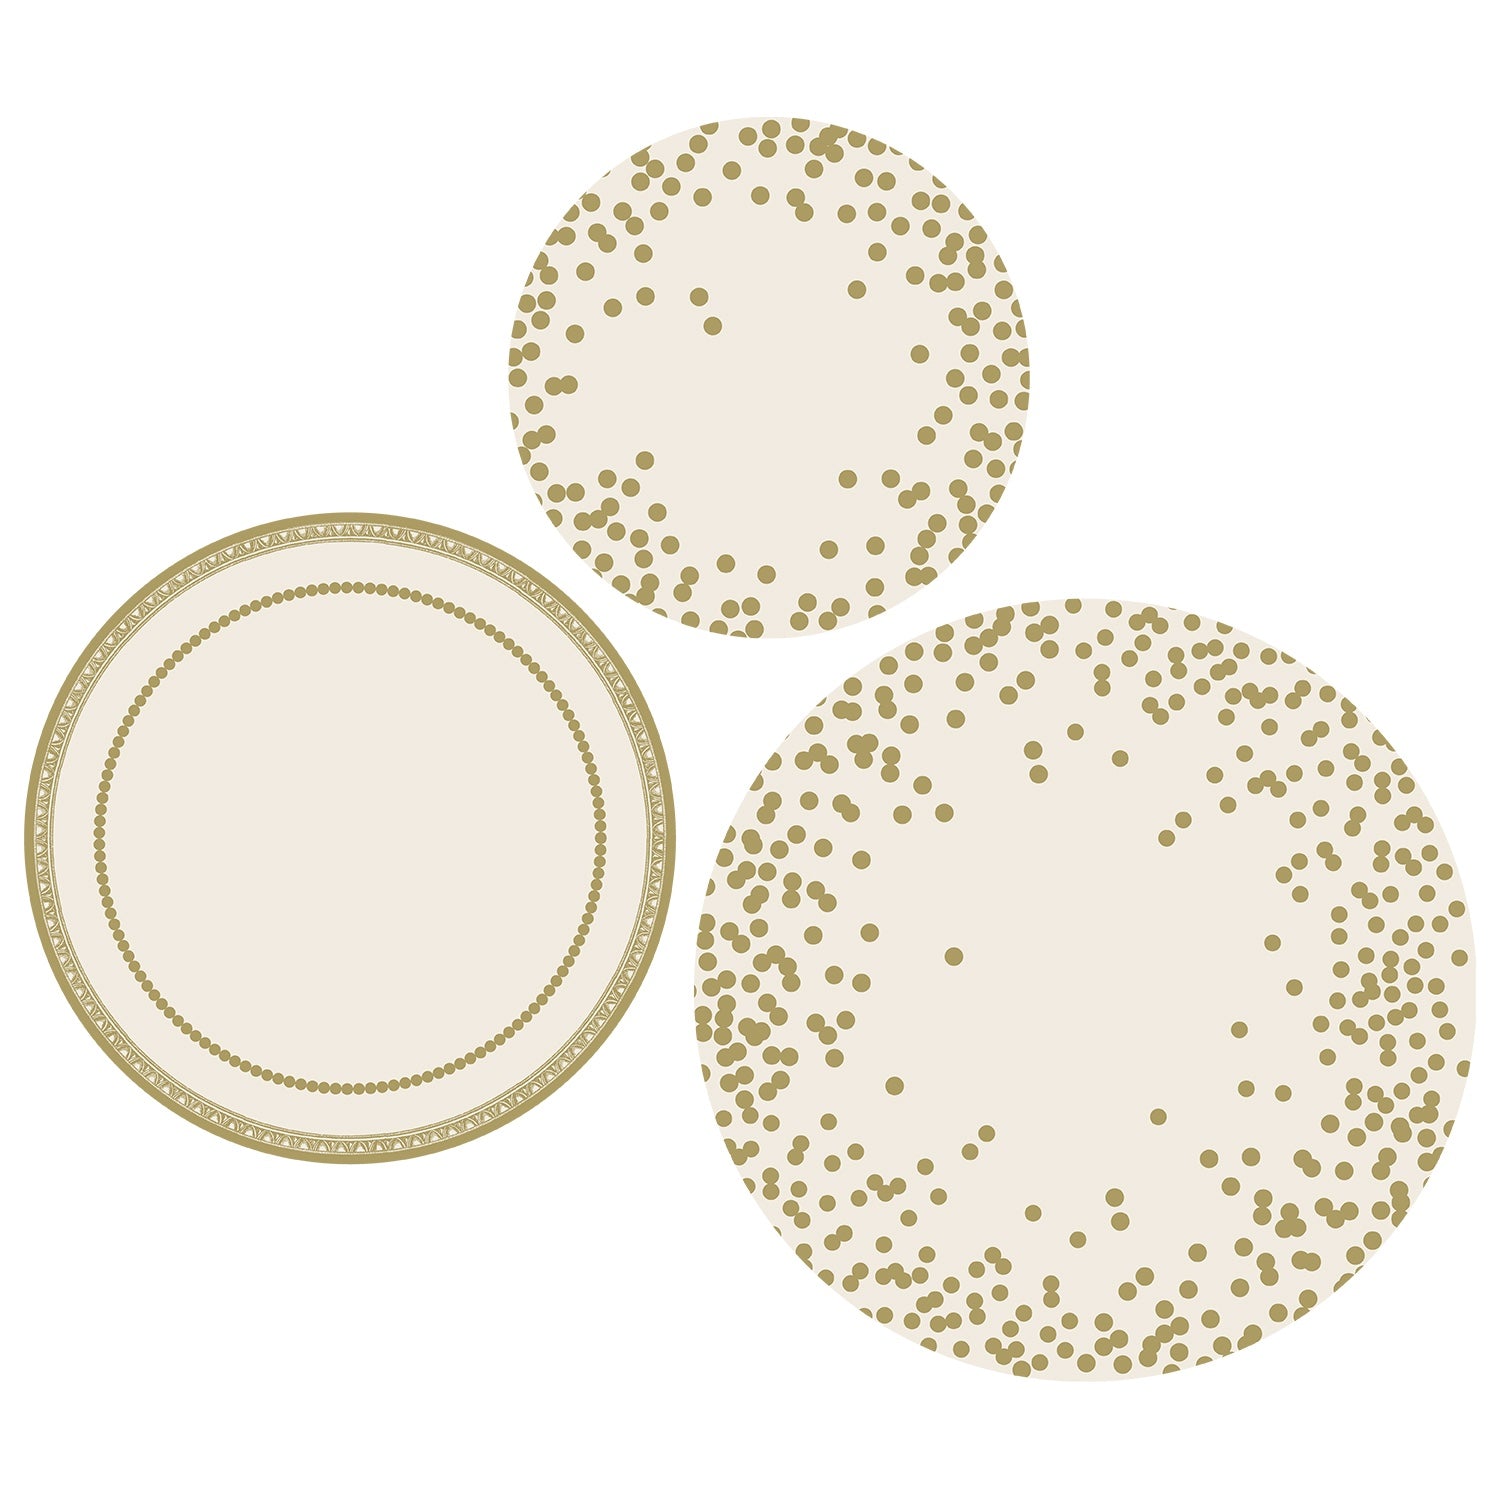 A set of Hester &amp; Cook Gold Serving Papers on a white background.